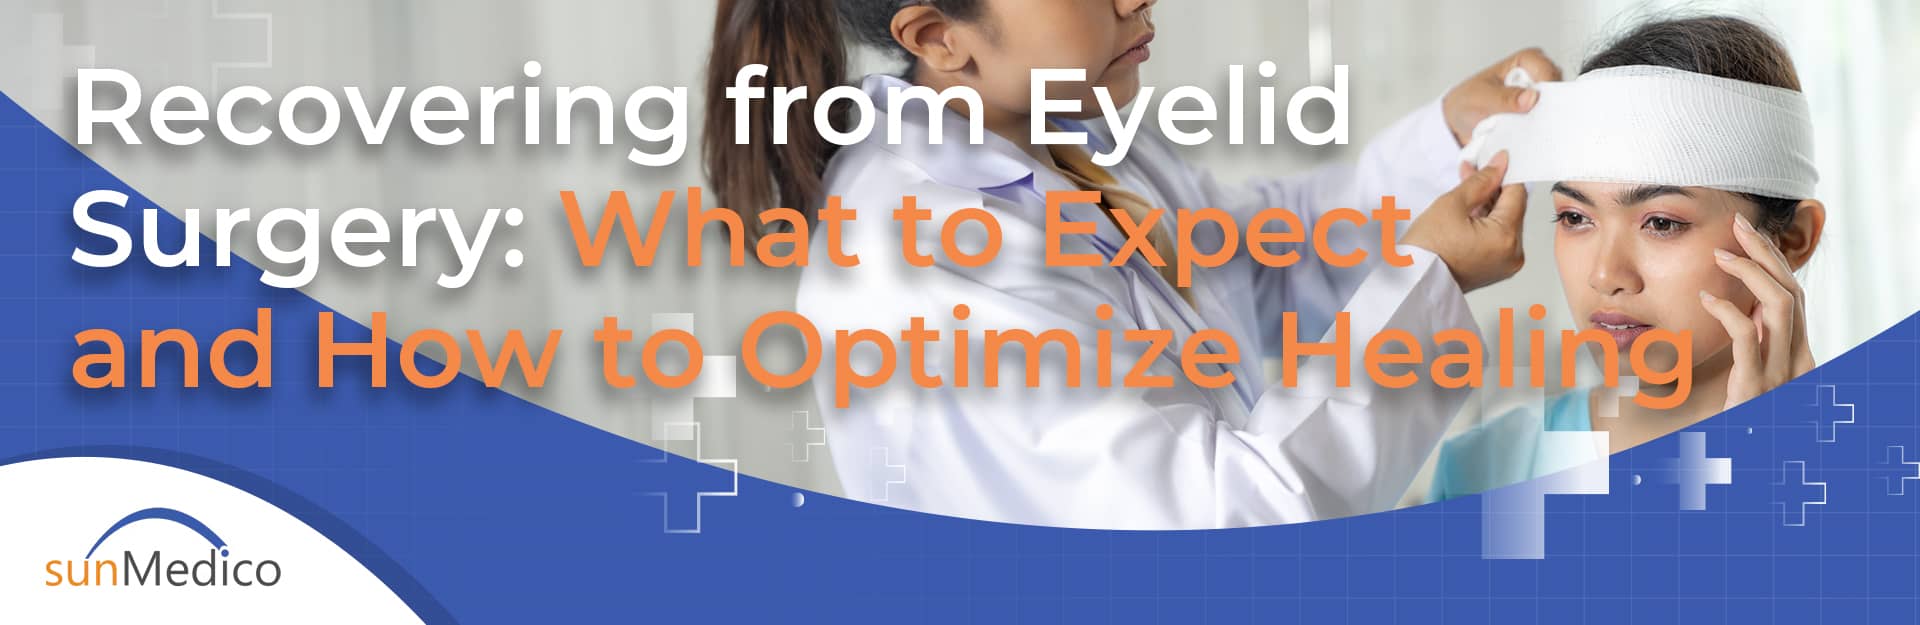 Recovering from Eyelid Surgery: What to Expect and How to Optimize Healing